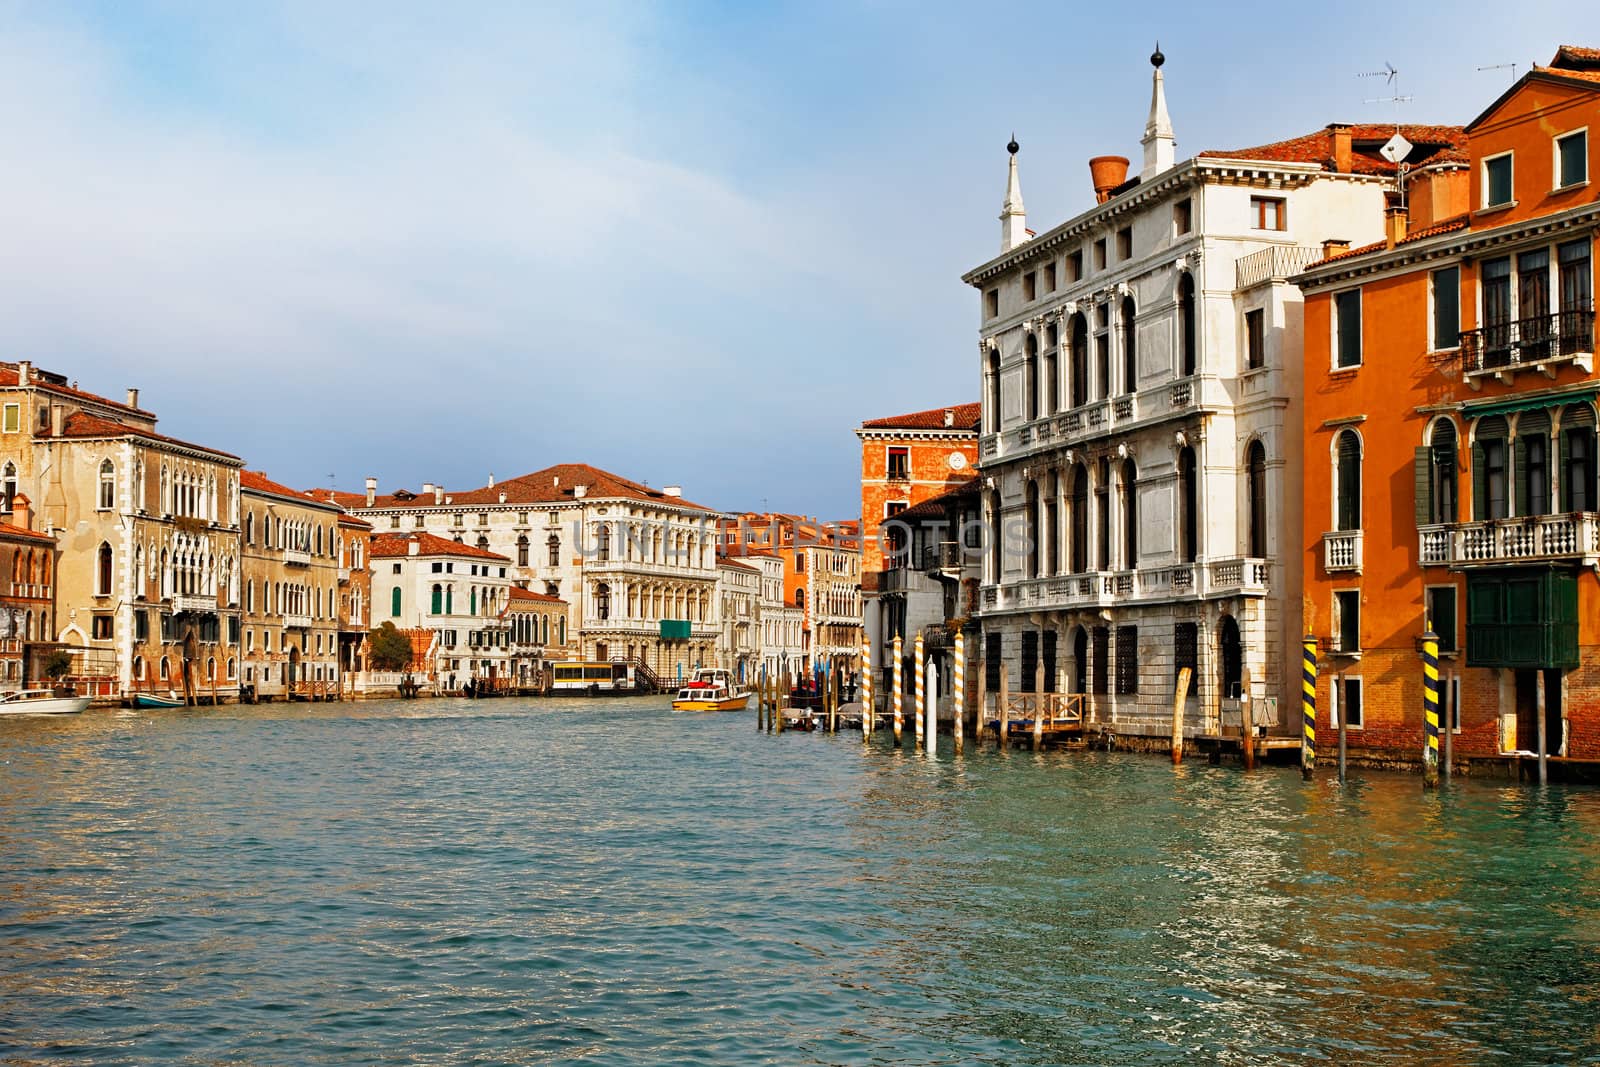 Morning image of the Canale Grande which is the main waterway in Venice,Italy.